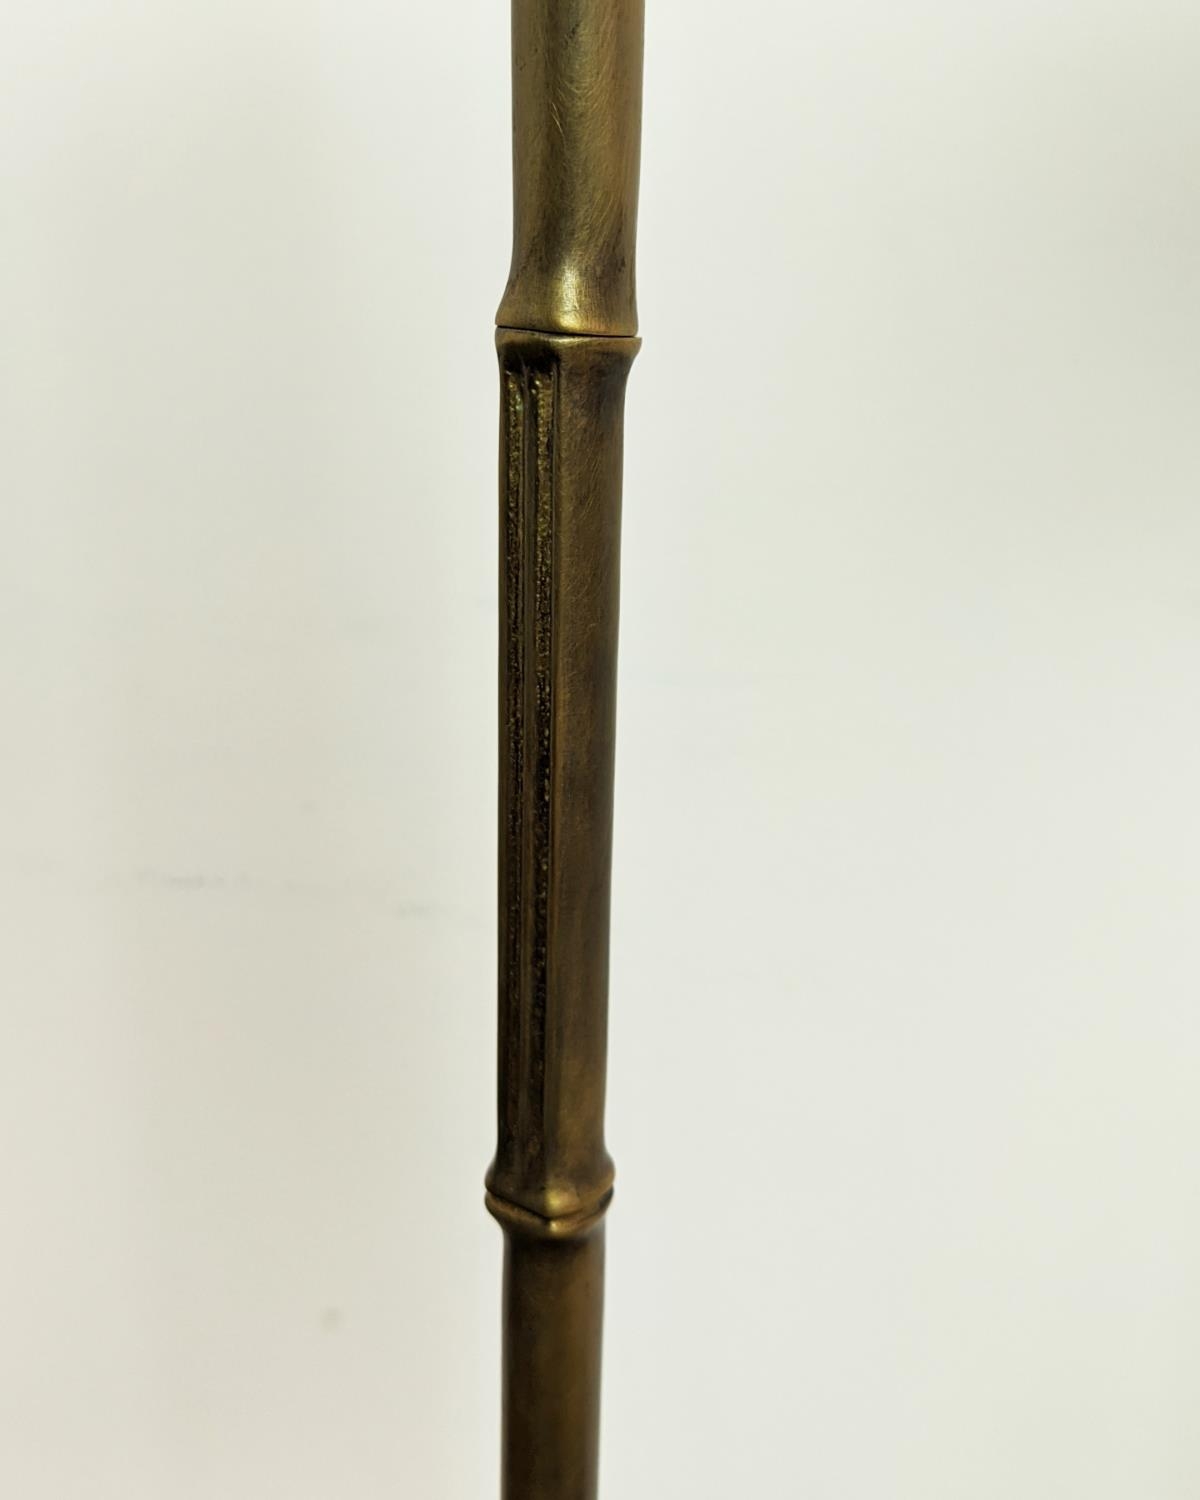 FLOOR READING LAMPS, a pair, faux bamboo metal, attributed to Vaughan, each 119cm H. (2) - Image 5 of 6